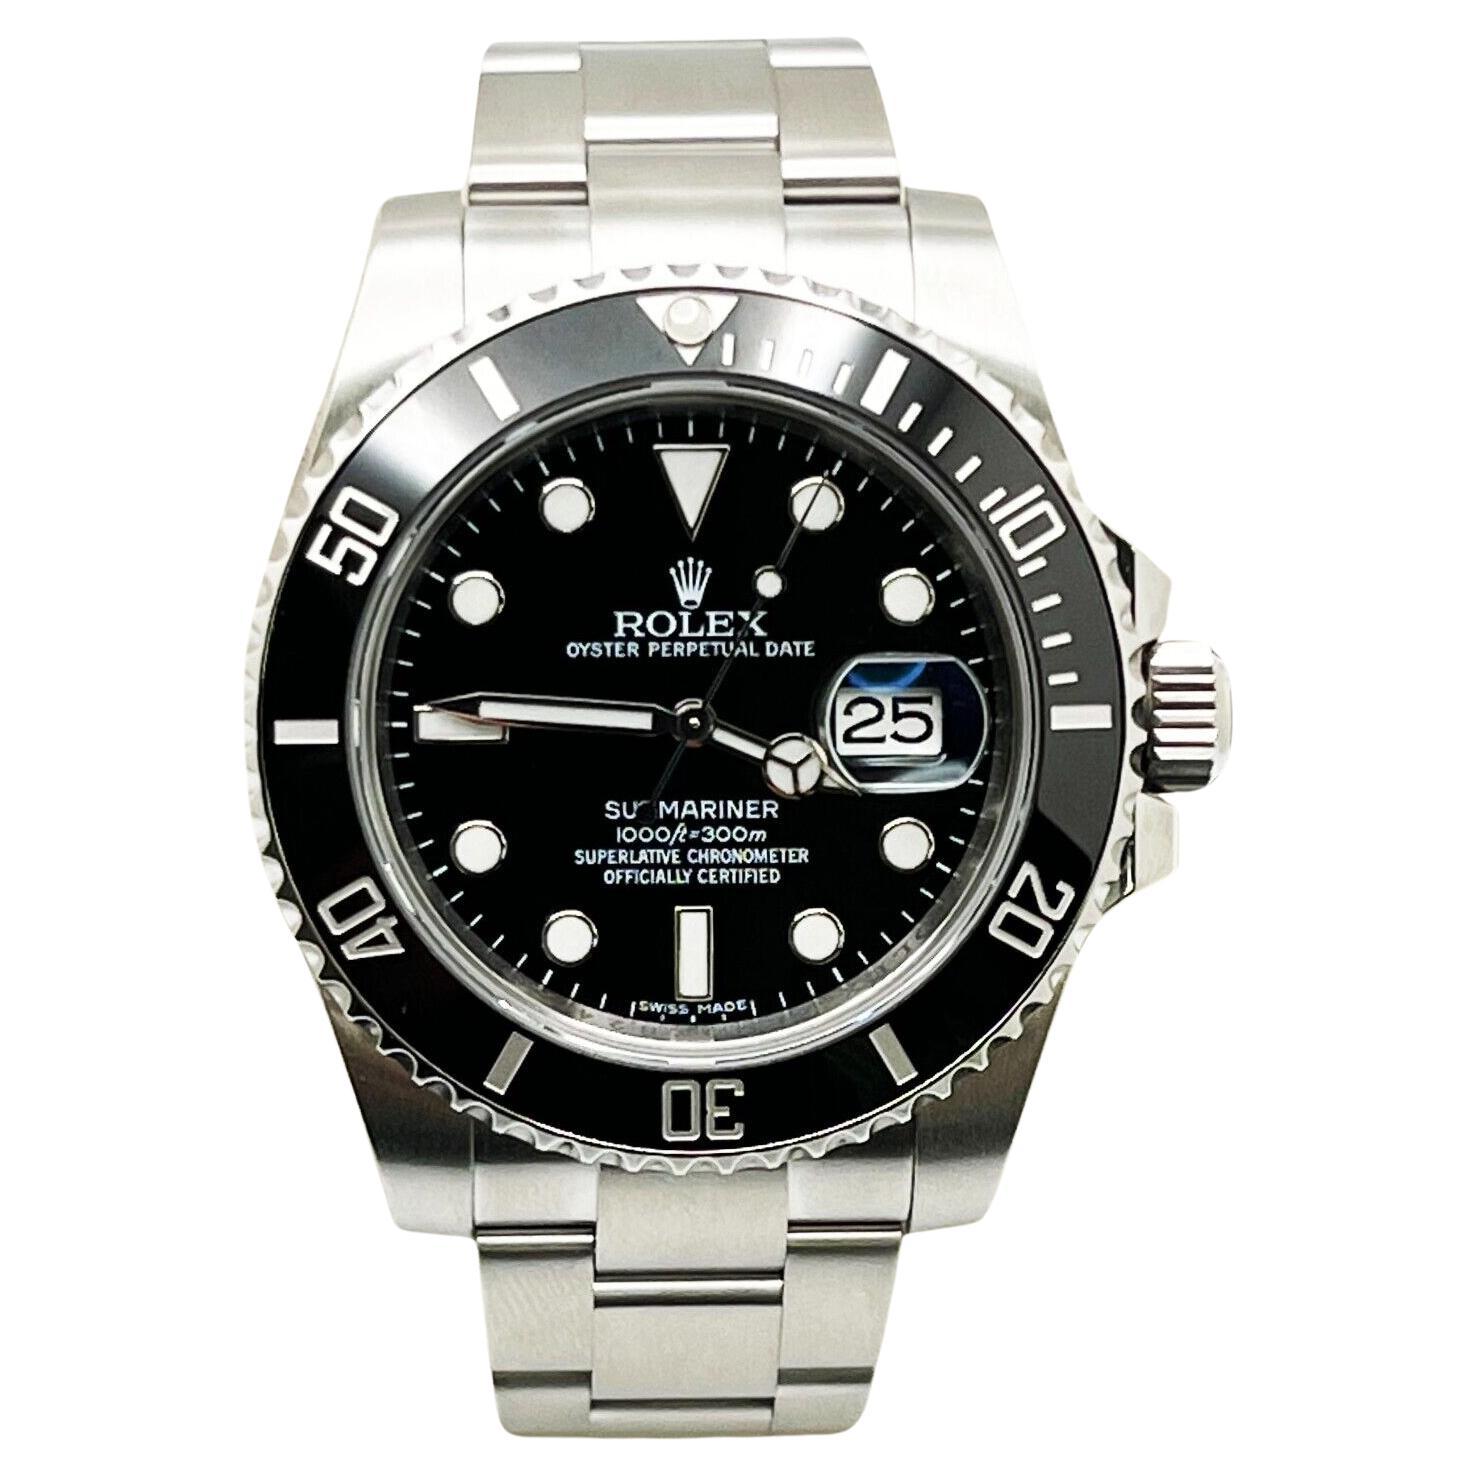 Rolex Submariner Ceramic 116610 Black Dial Stainless Steel 40mm Box Papers